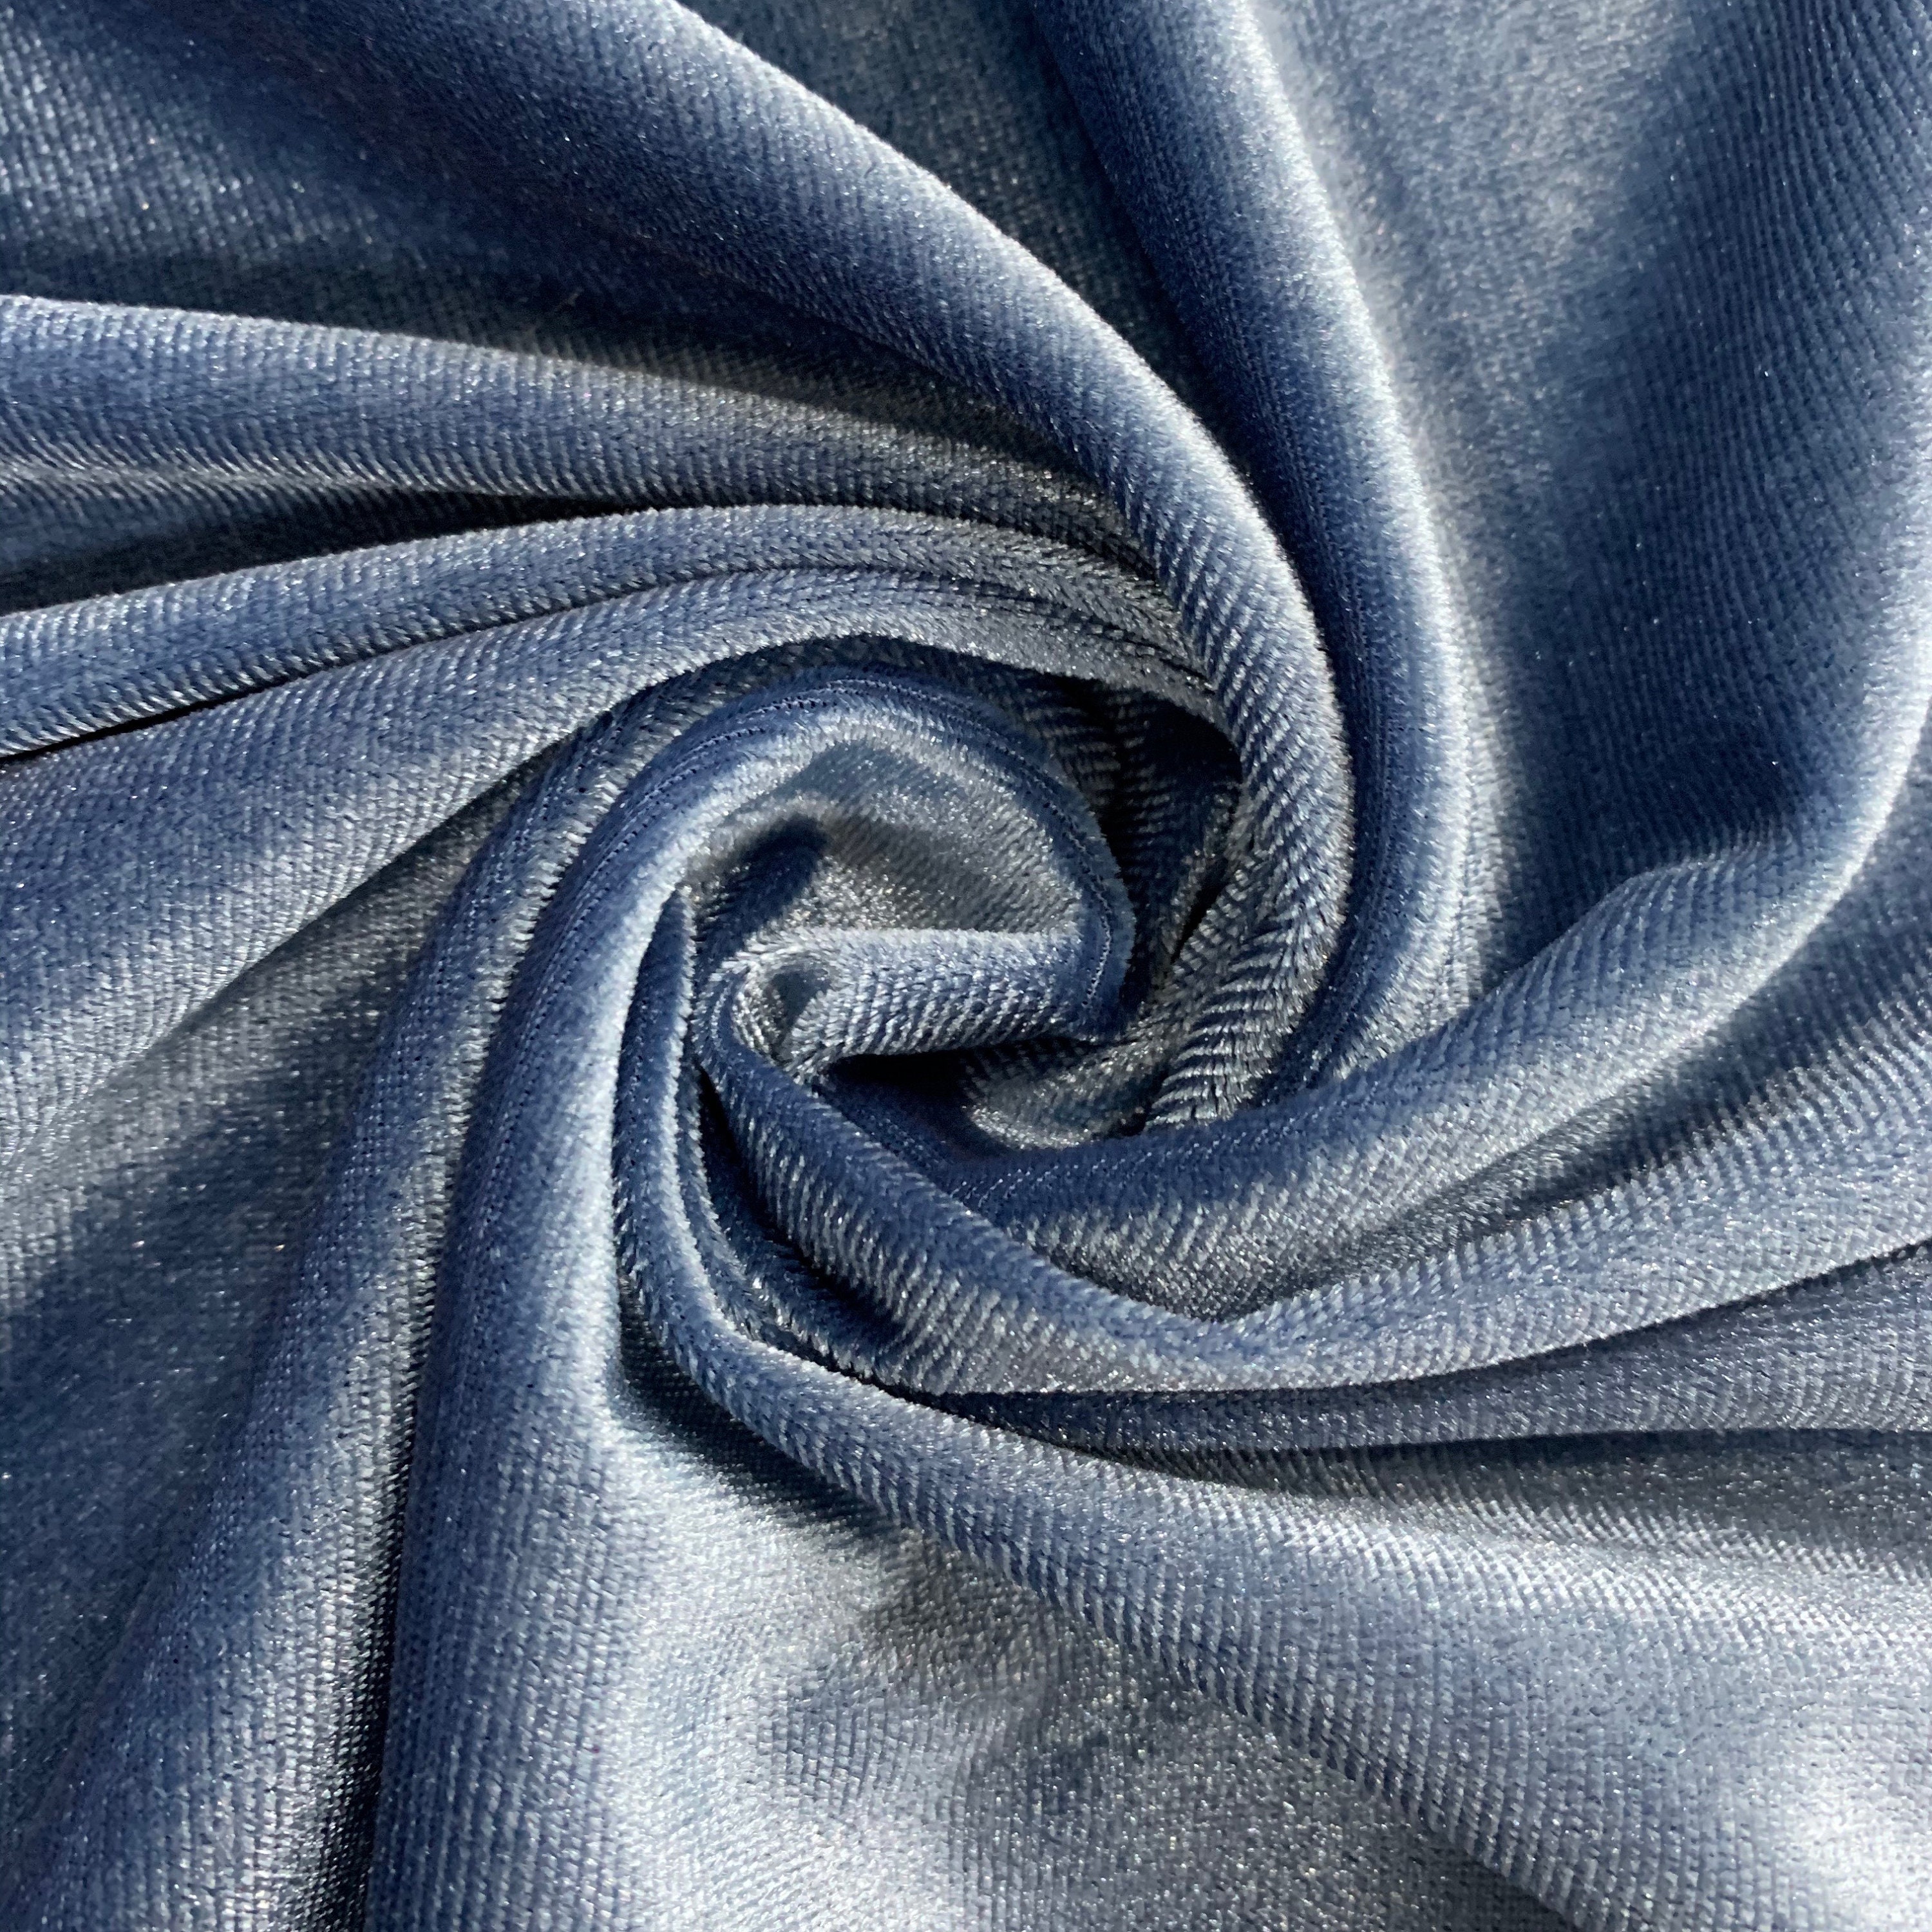 Crafts 10001 Dresses Dance Wear Skirts Princess SLATE BLUE Polyester Spandex Stretch Velvet Fabric by the Yard for Tops Costumes